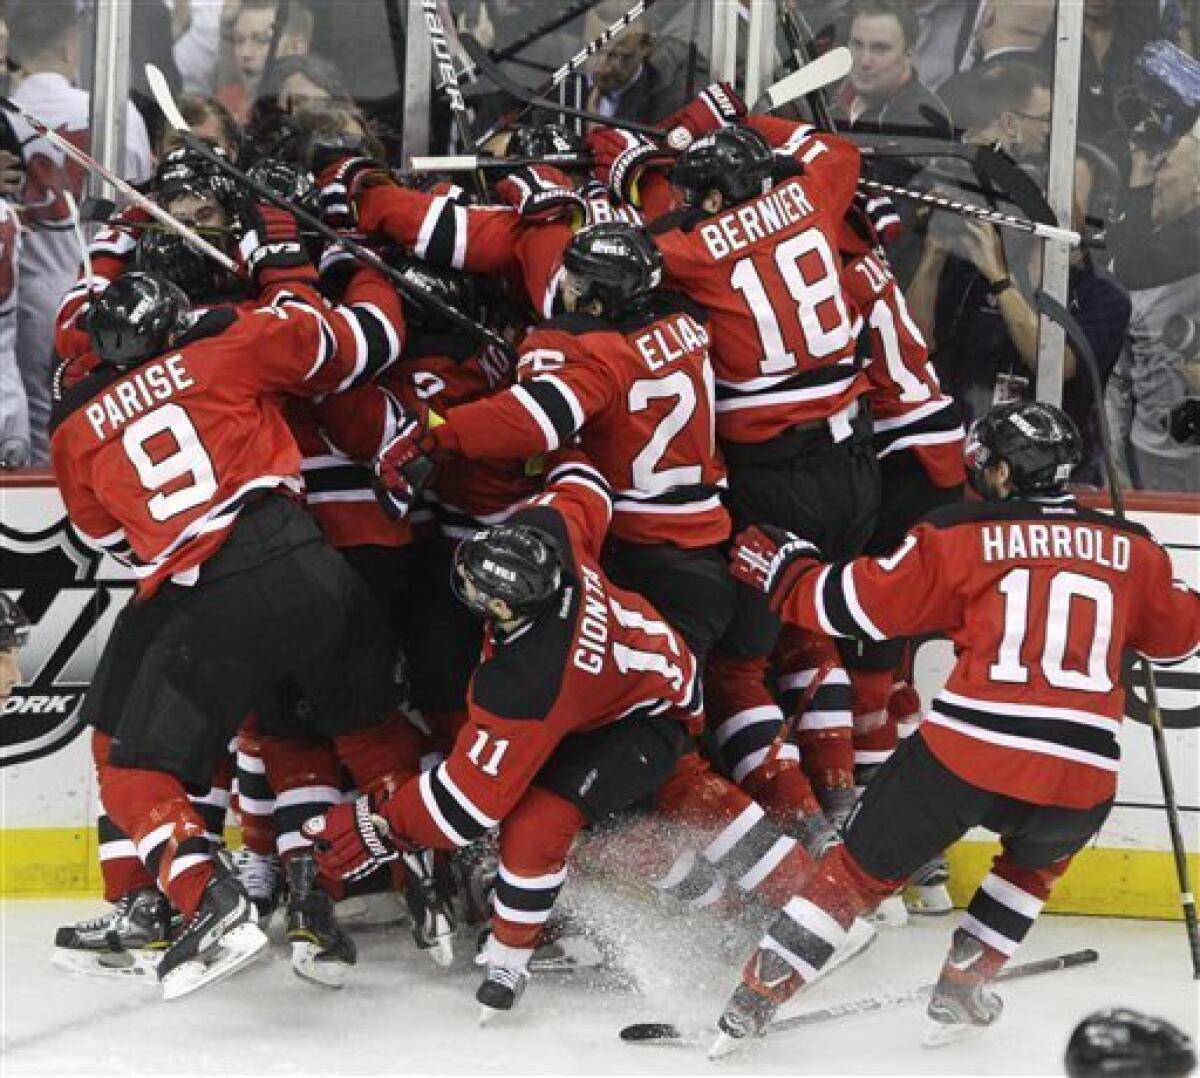 New Jersey Devils 3 time Stanley Cup Champions